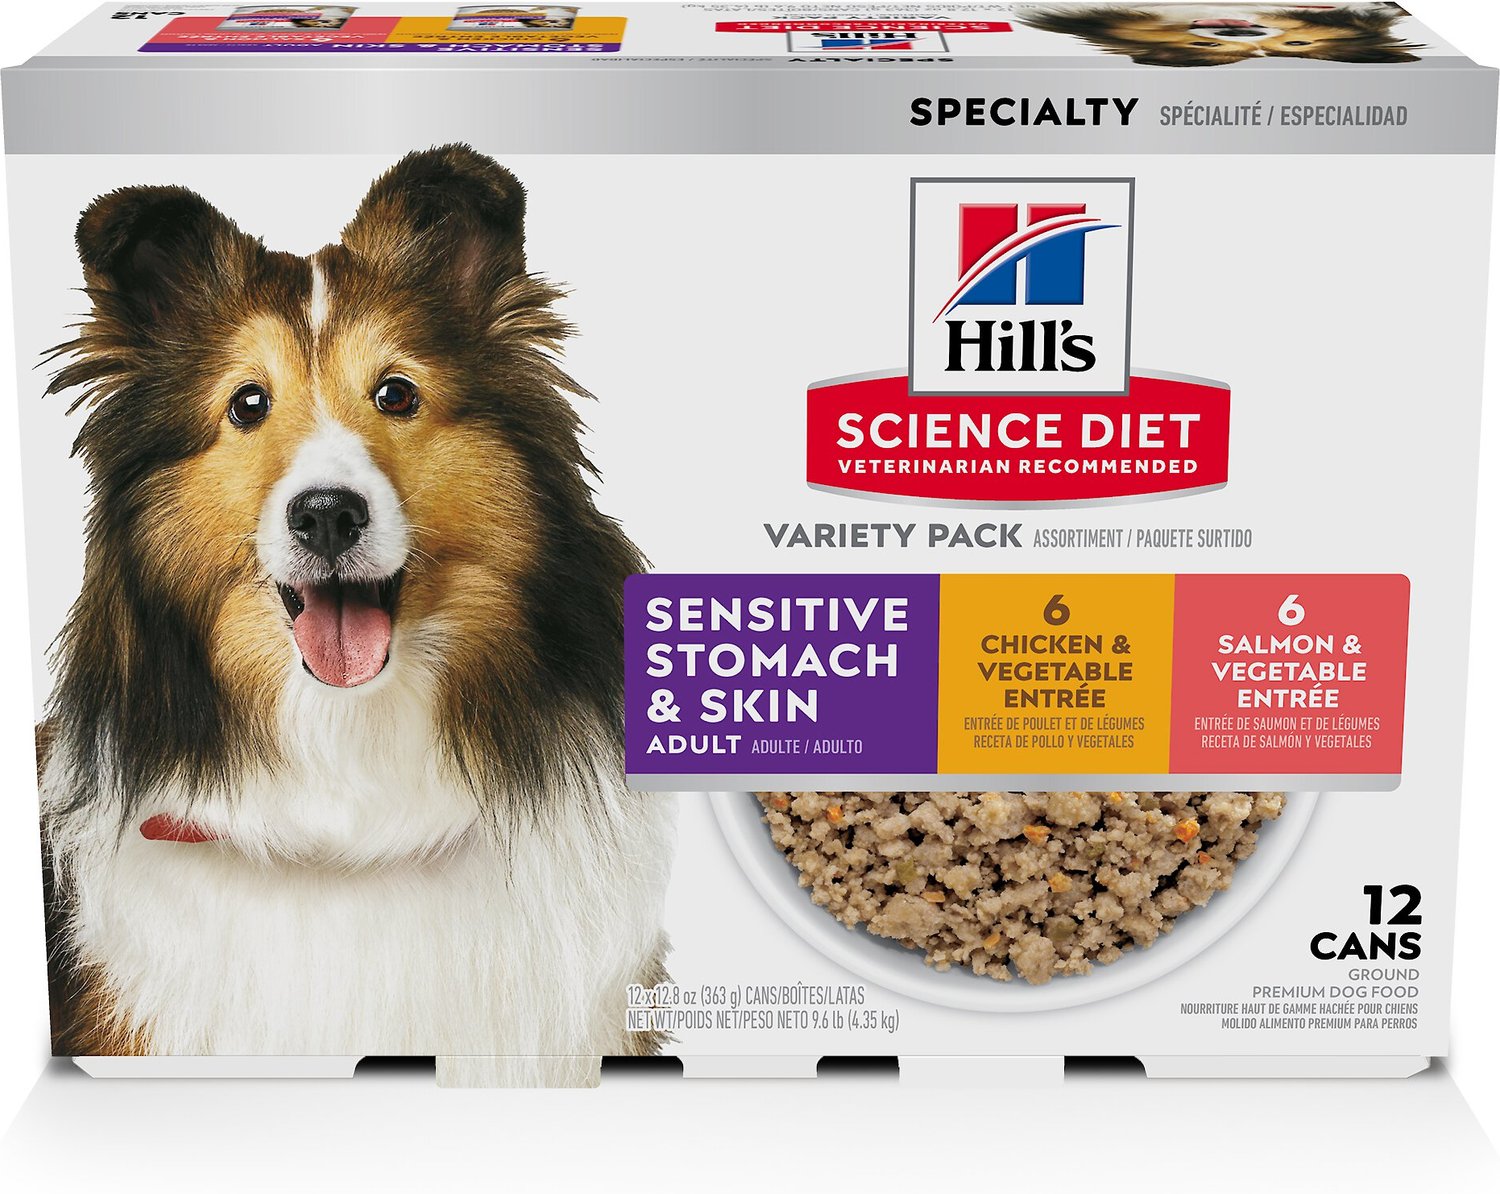 HILL'S SCIENCE DIET Sensitive Stomach & Skin Variety Pack